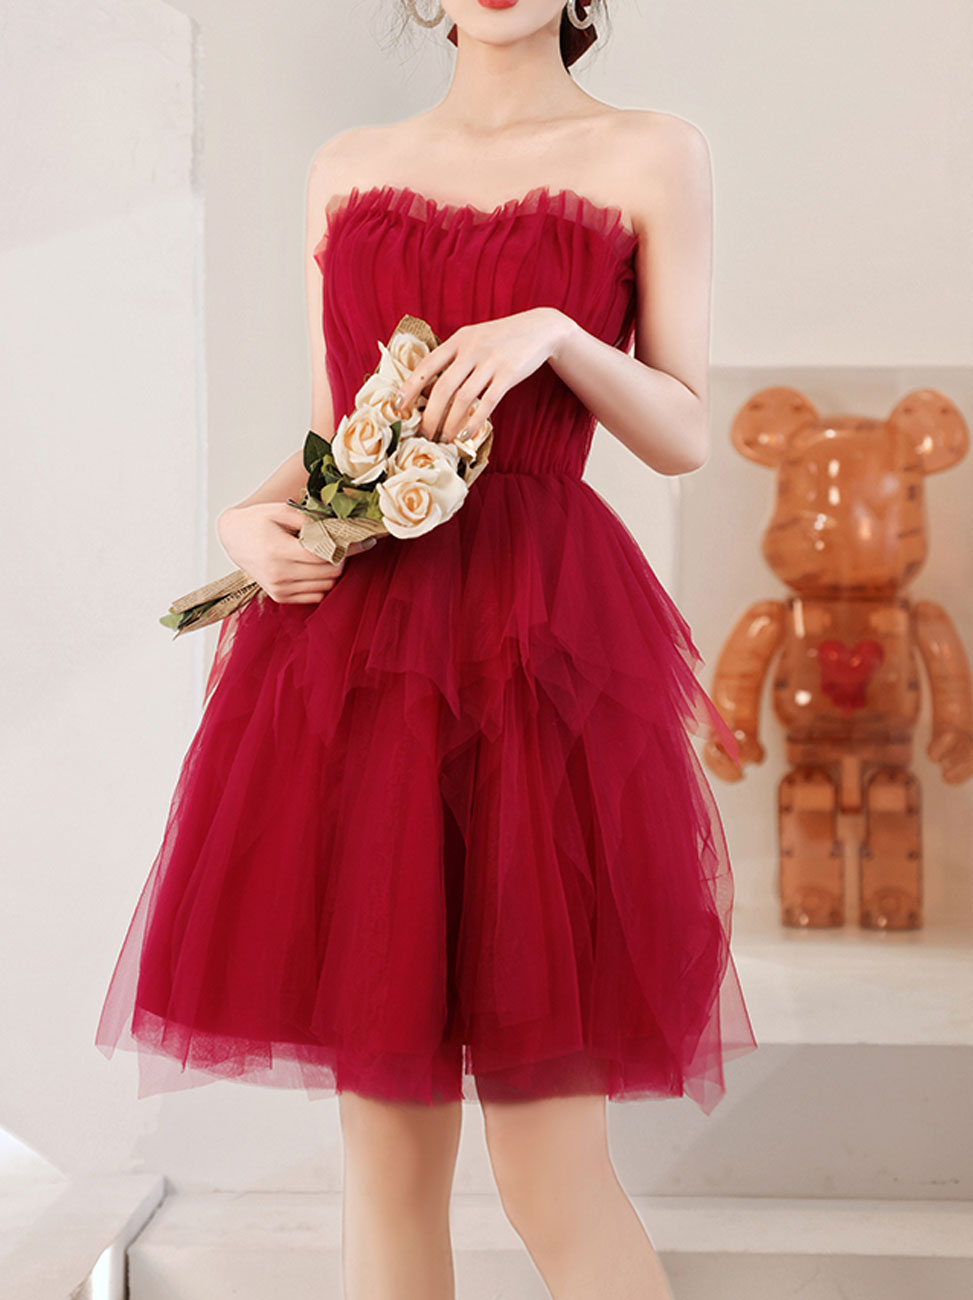 Details more than 190 red wine colour dress